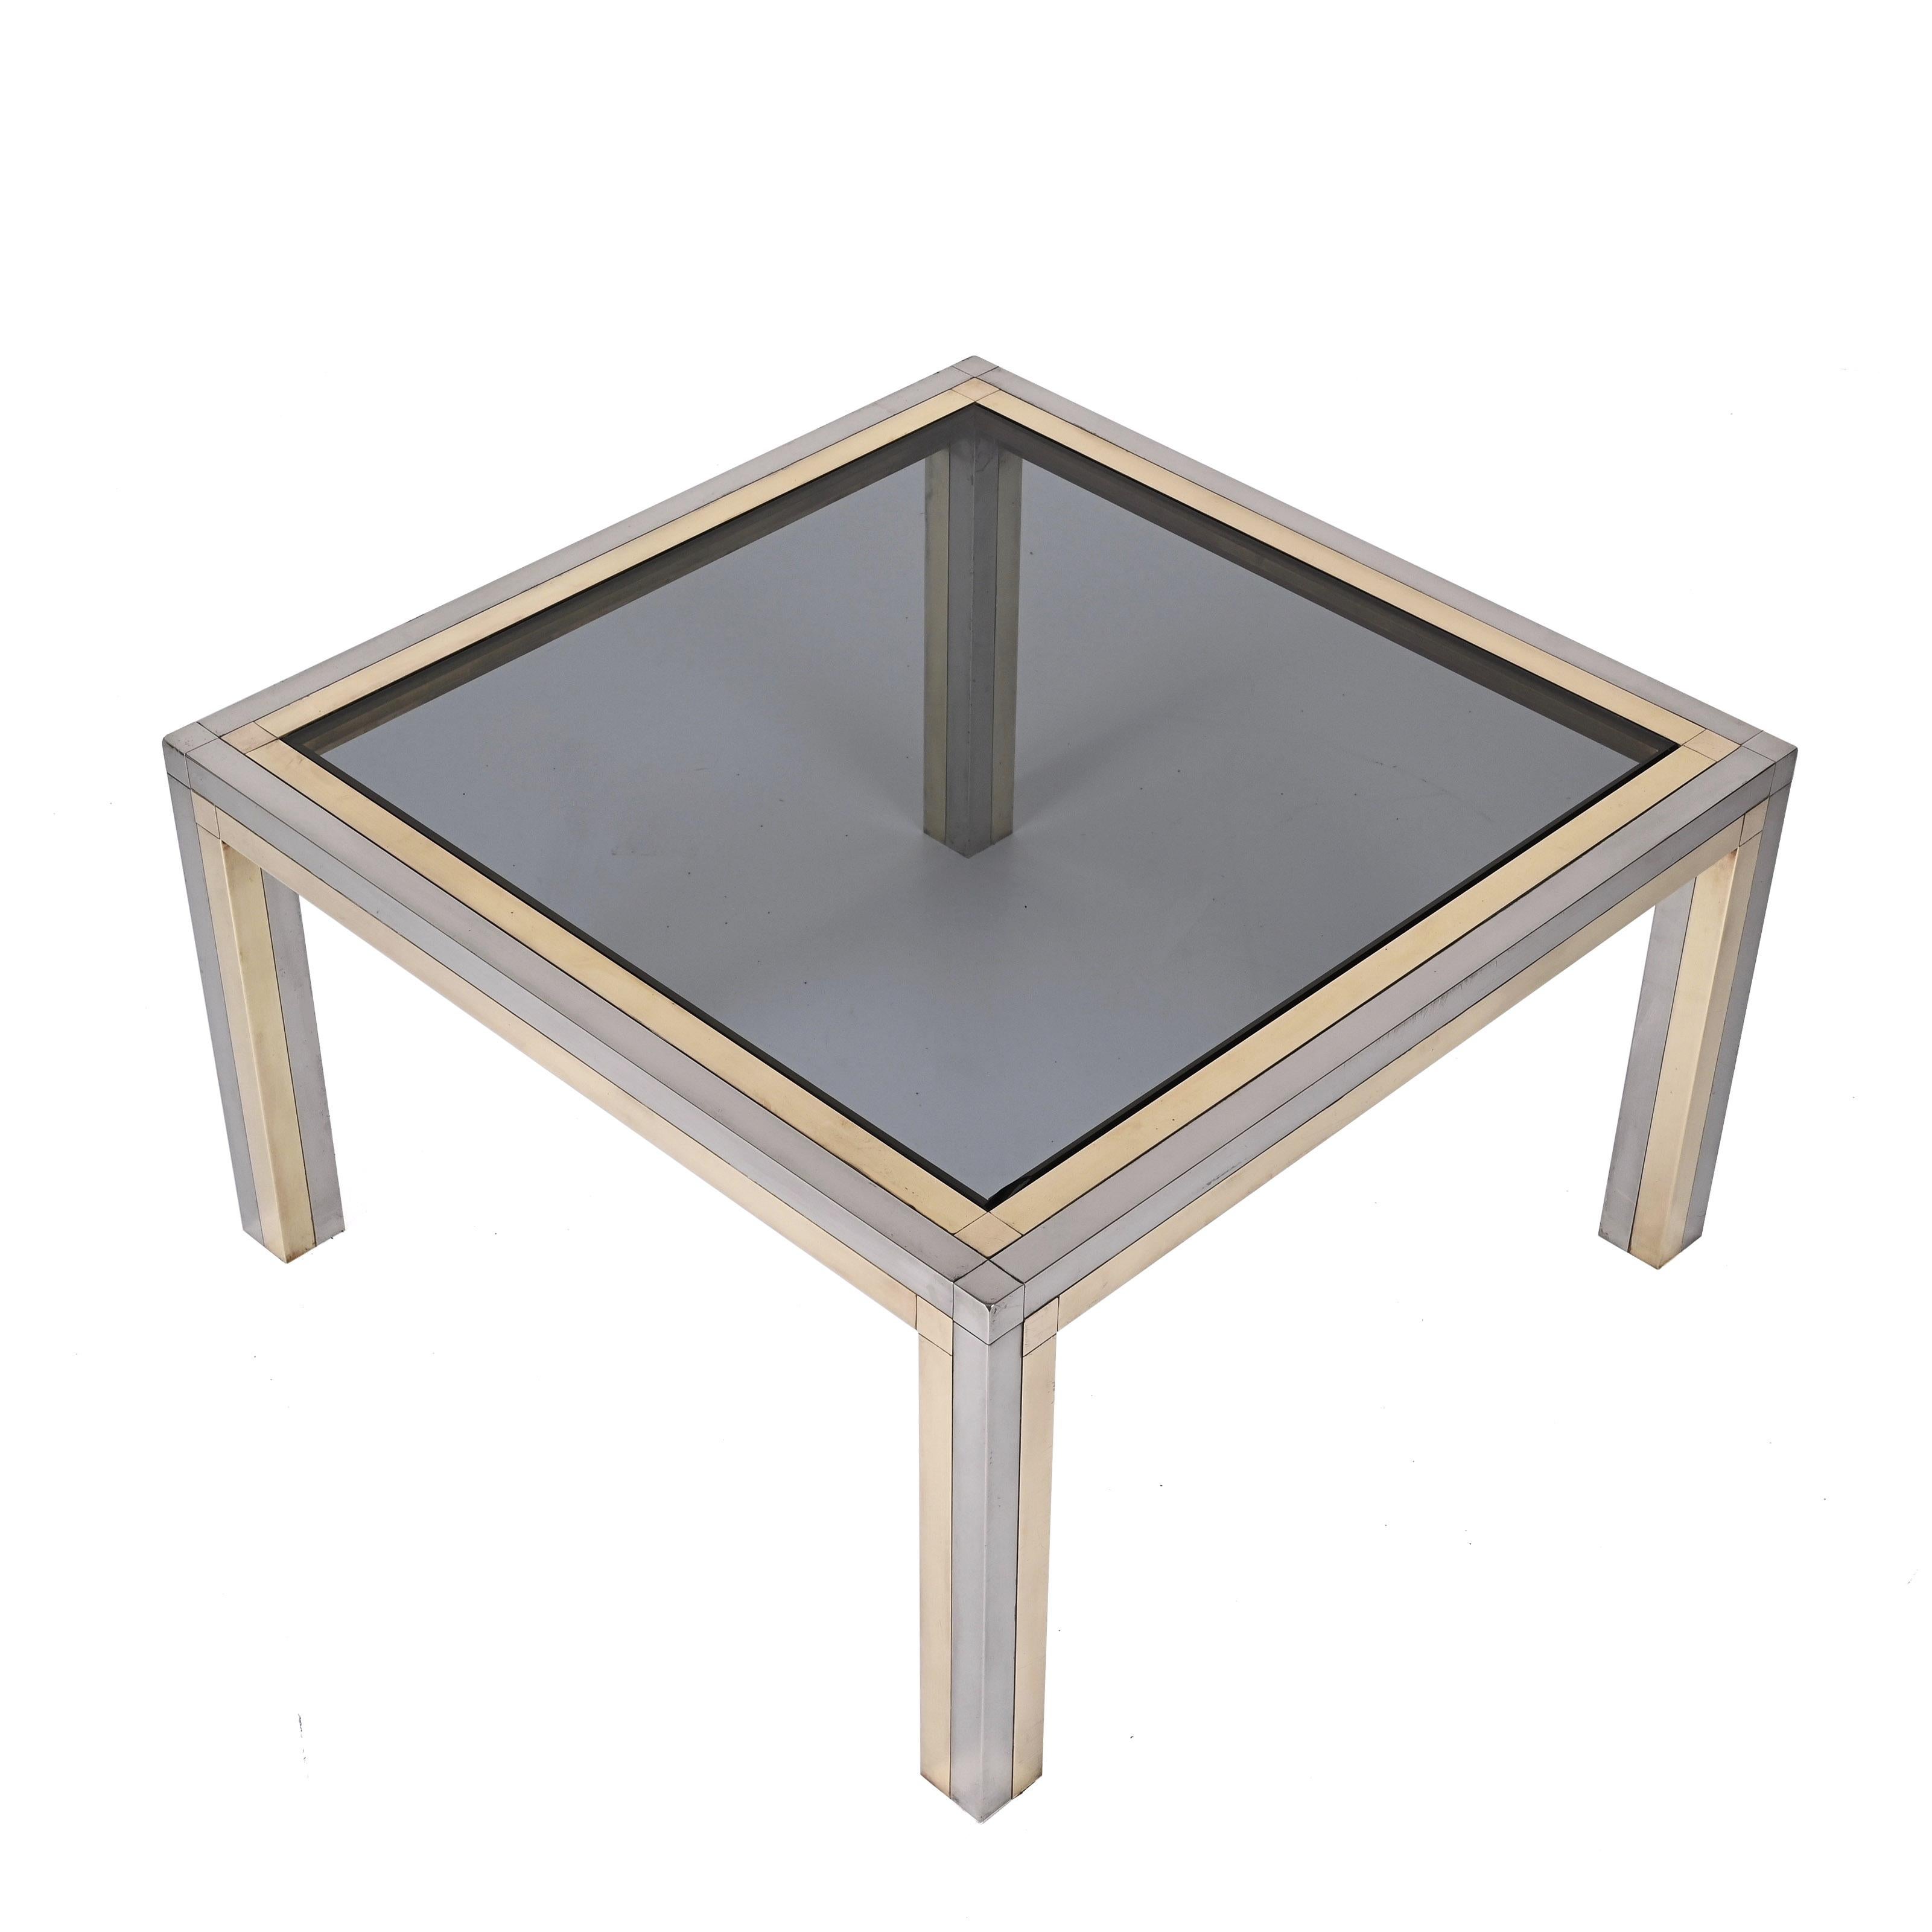 Elegant brass, chrome and smoked glass square coffee table. Romeo Rega designed this elegant coffee table during the 1970s in Italy.

The unique combination of straight and pure lines with superb materials, makes this item a go-to for Italian